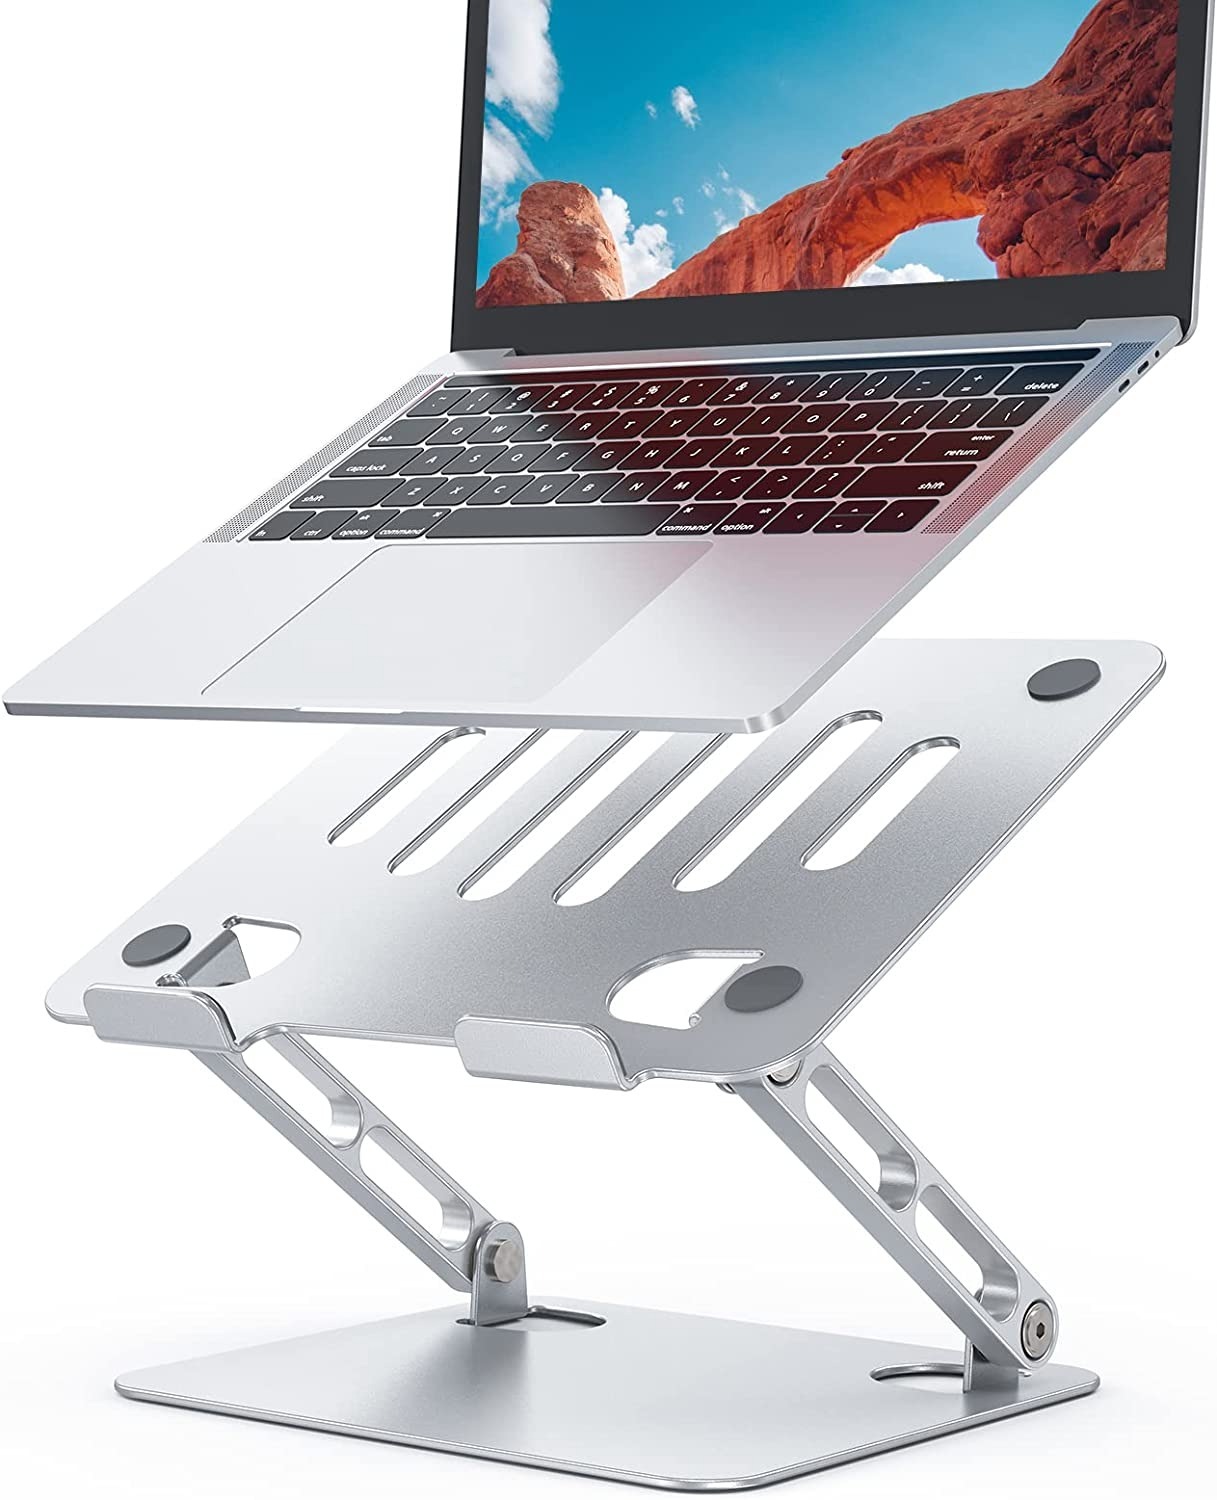 HUANUO Adjustable Portable Laptop Stand for up to 17" Laptops (Silver) $12 + Free Shipping